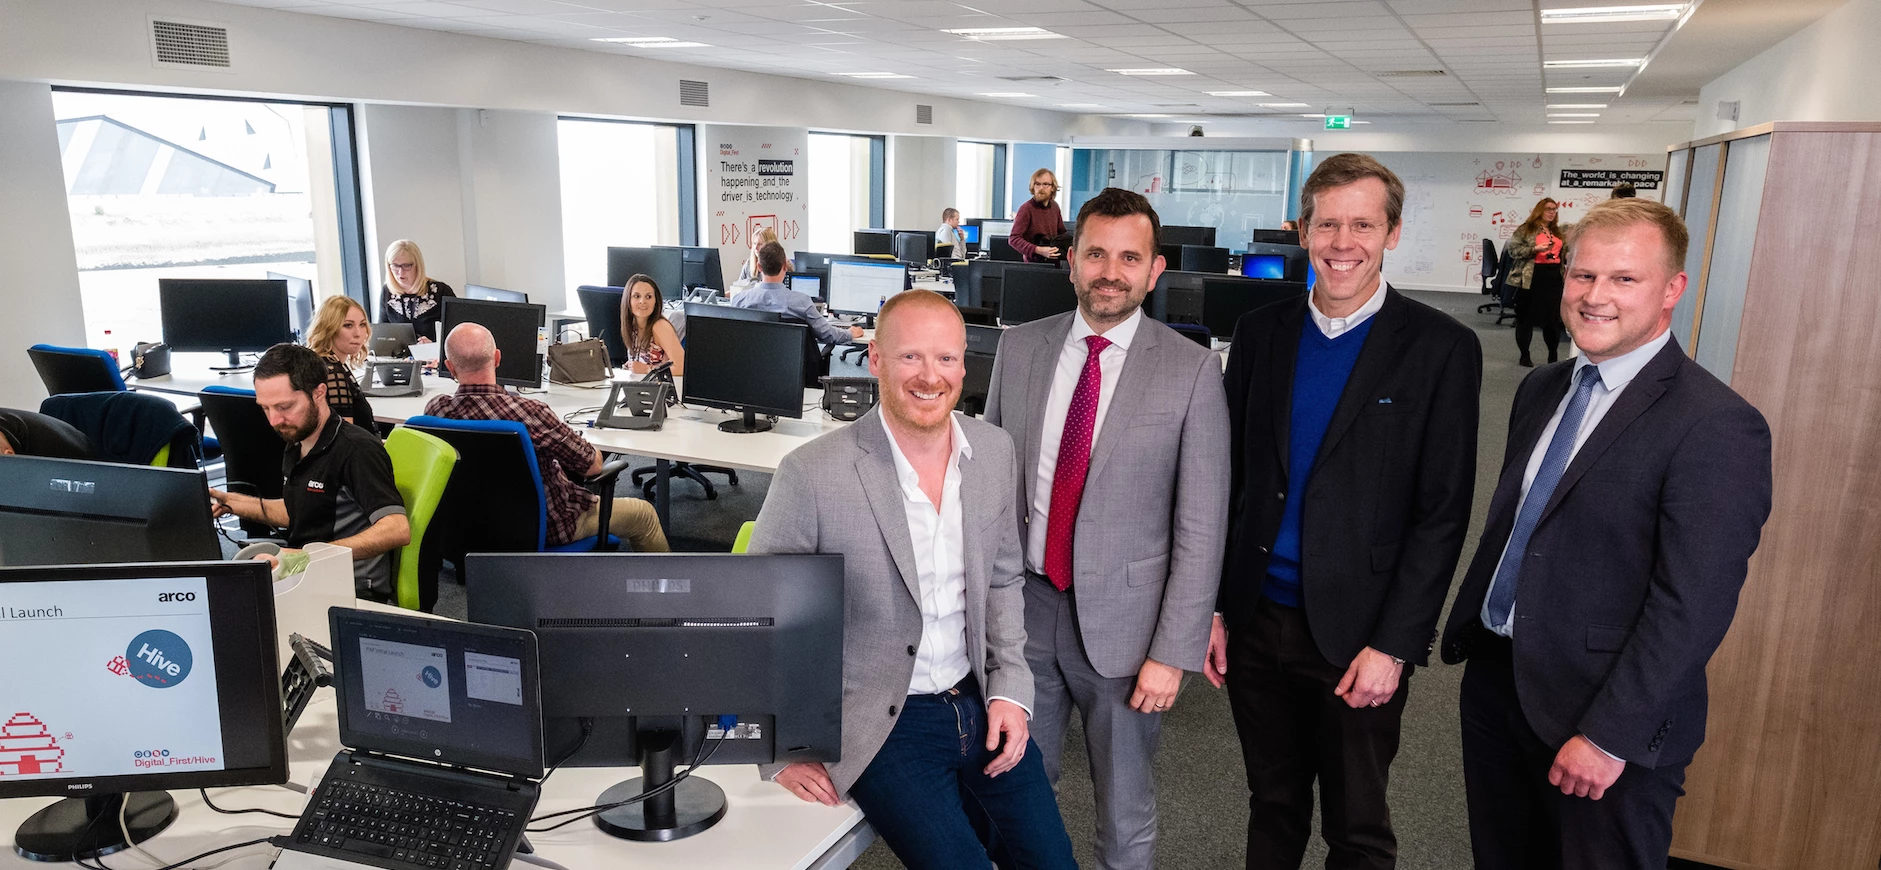 Arco Digital Director Richard Martin, Wykeland Group Managing Director Dominic Gibbons, Arco Chief Executive Neil Jowsey and Wykeland Asset Manager John Gouldthorp in the new home for Arco’s digital team.